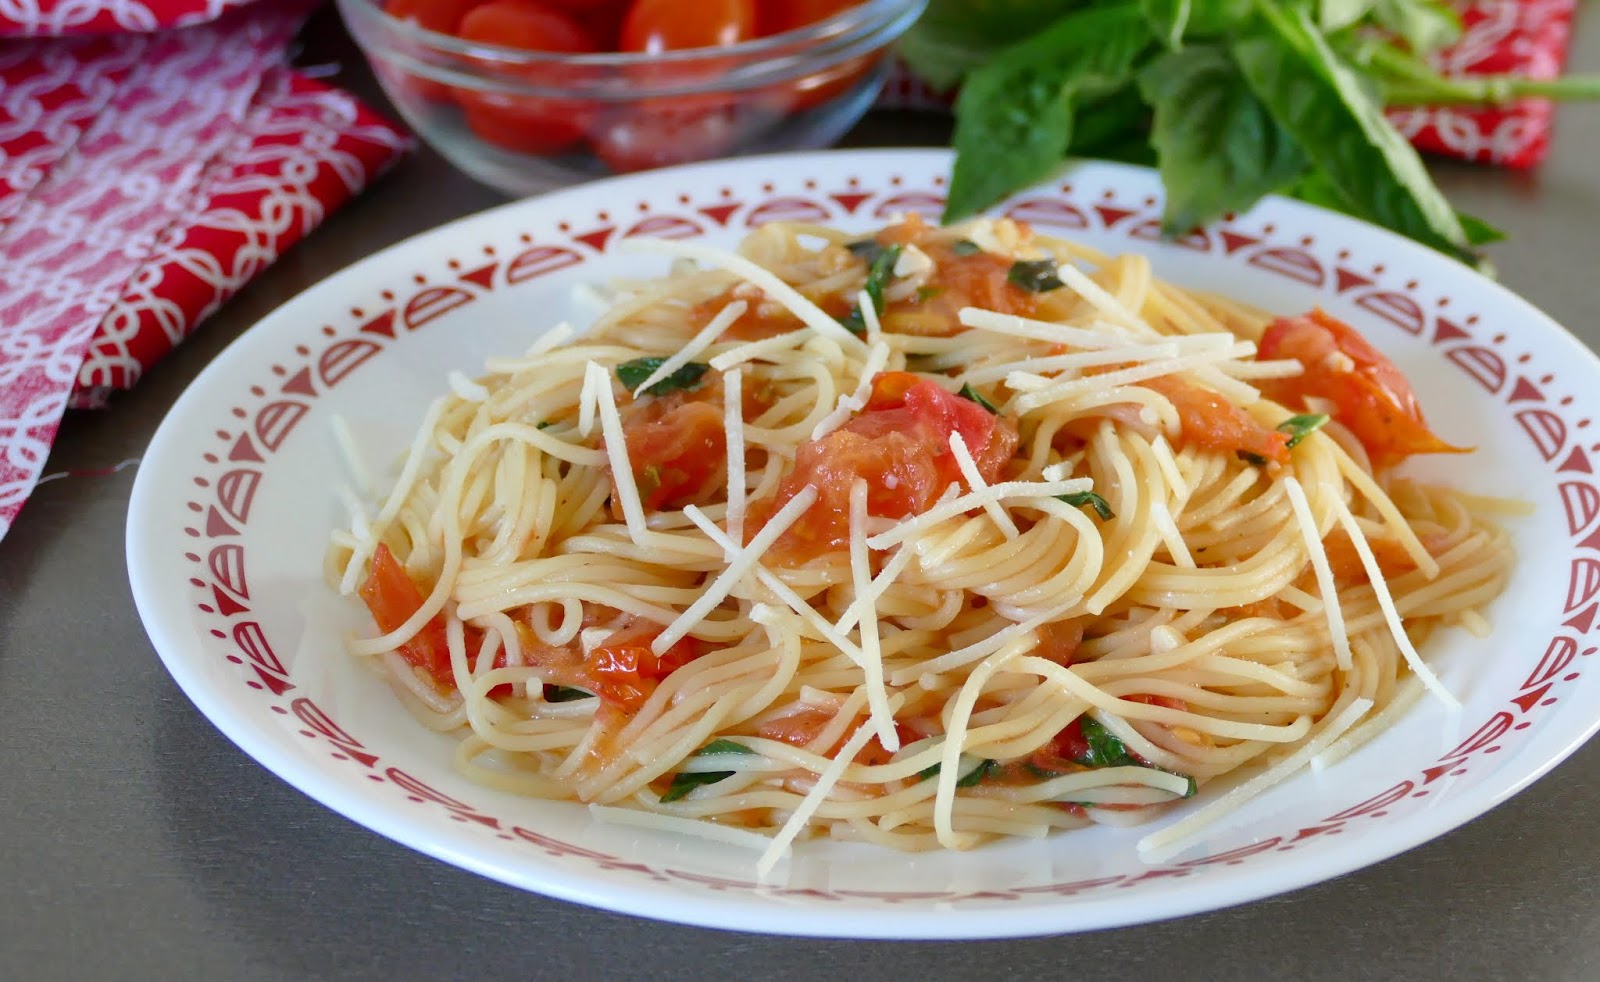 This easy, fresh and delicious copycat recipe from Ciatti's in Saint Cloud, Minnesota is a family favorite! The fresh tomatoes, basil and garlic give the pasta SO much amazing flavor and it's ready in less than 45 minutes, including prep time! Such a wonderful spring or summer lunch or dinner!